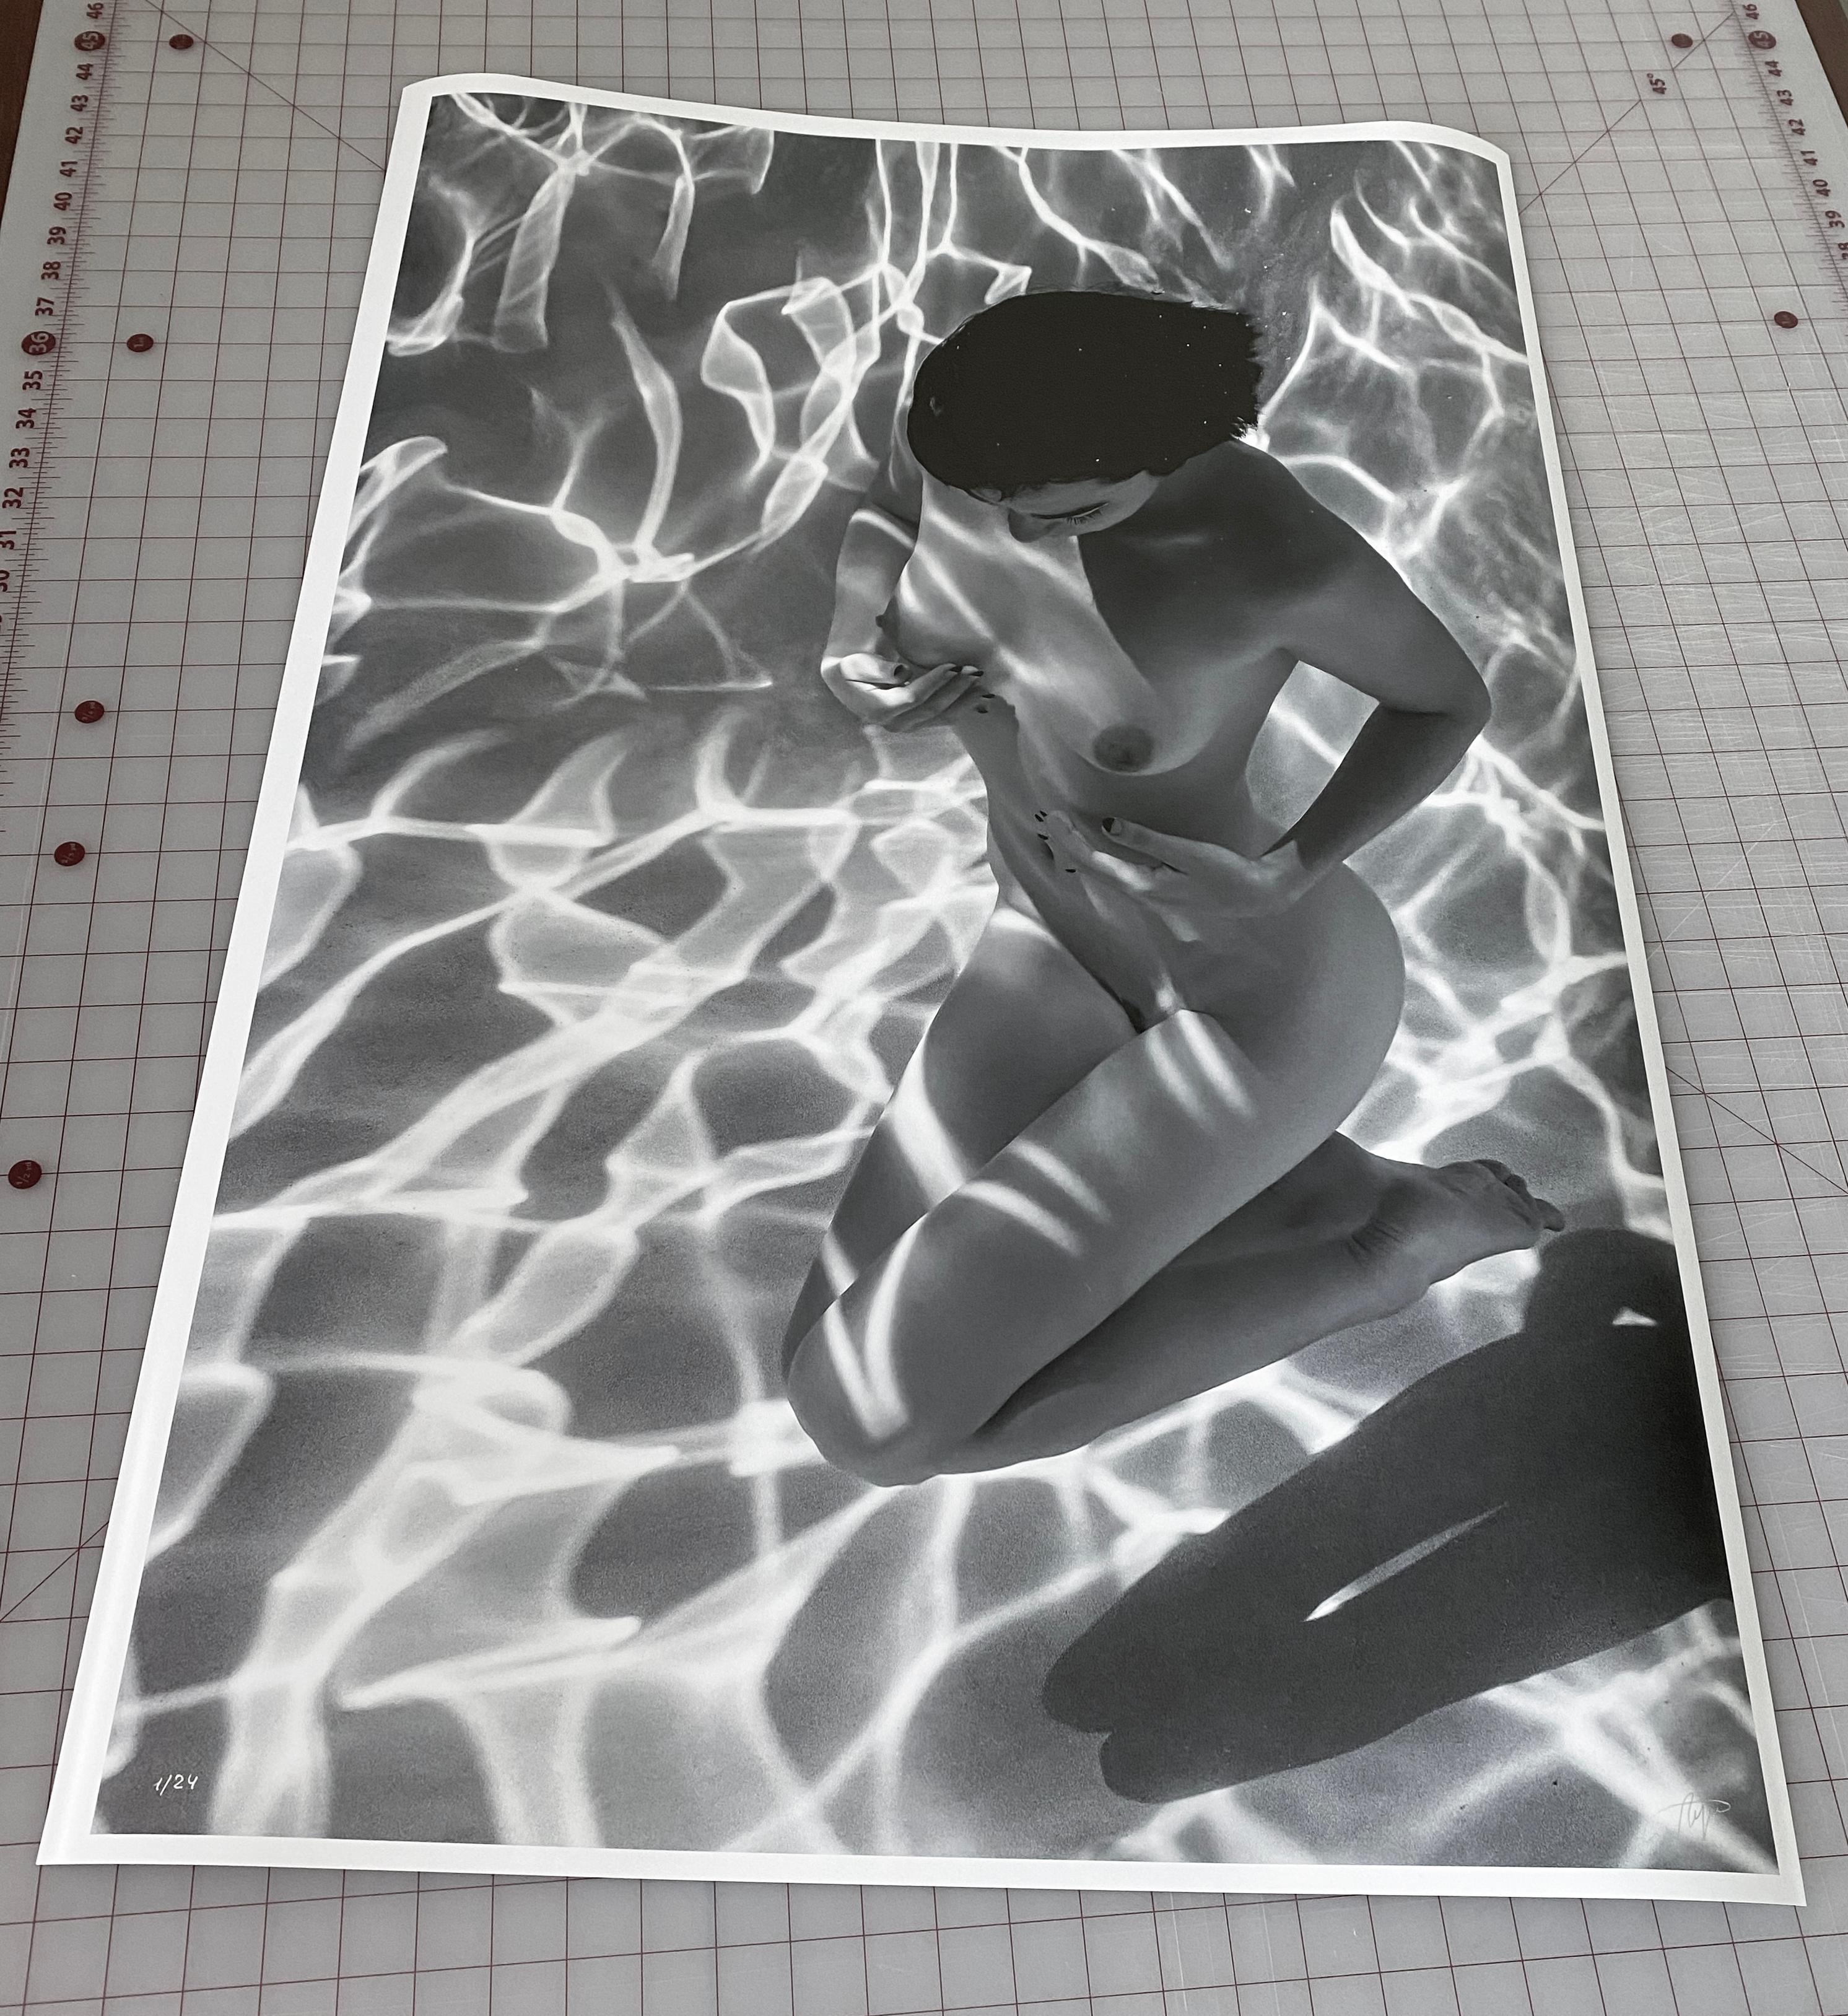 An underwater black and white photograph of a beautiful naked model on her knees at the bottom of the pool.

Original gallery quality archival pigment print on paper signed by the artist.
Limited edition of 24.
The artwork is furnished with